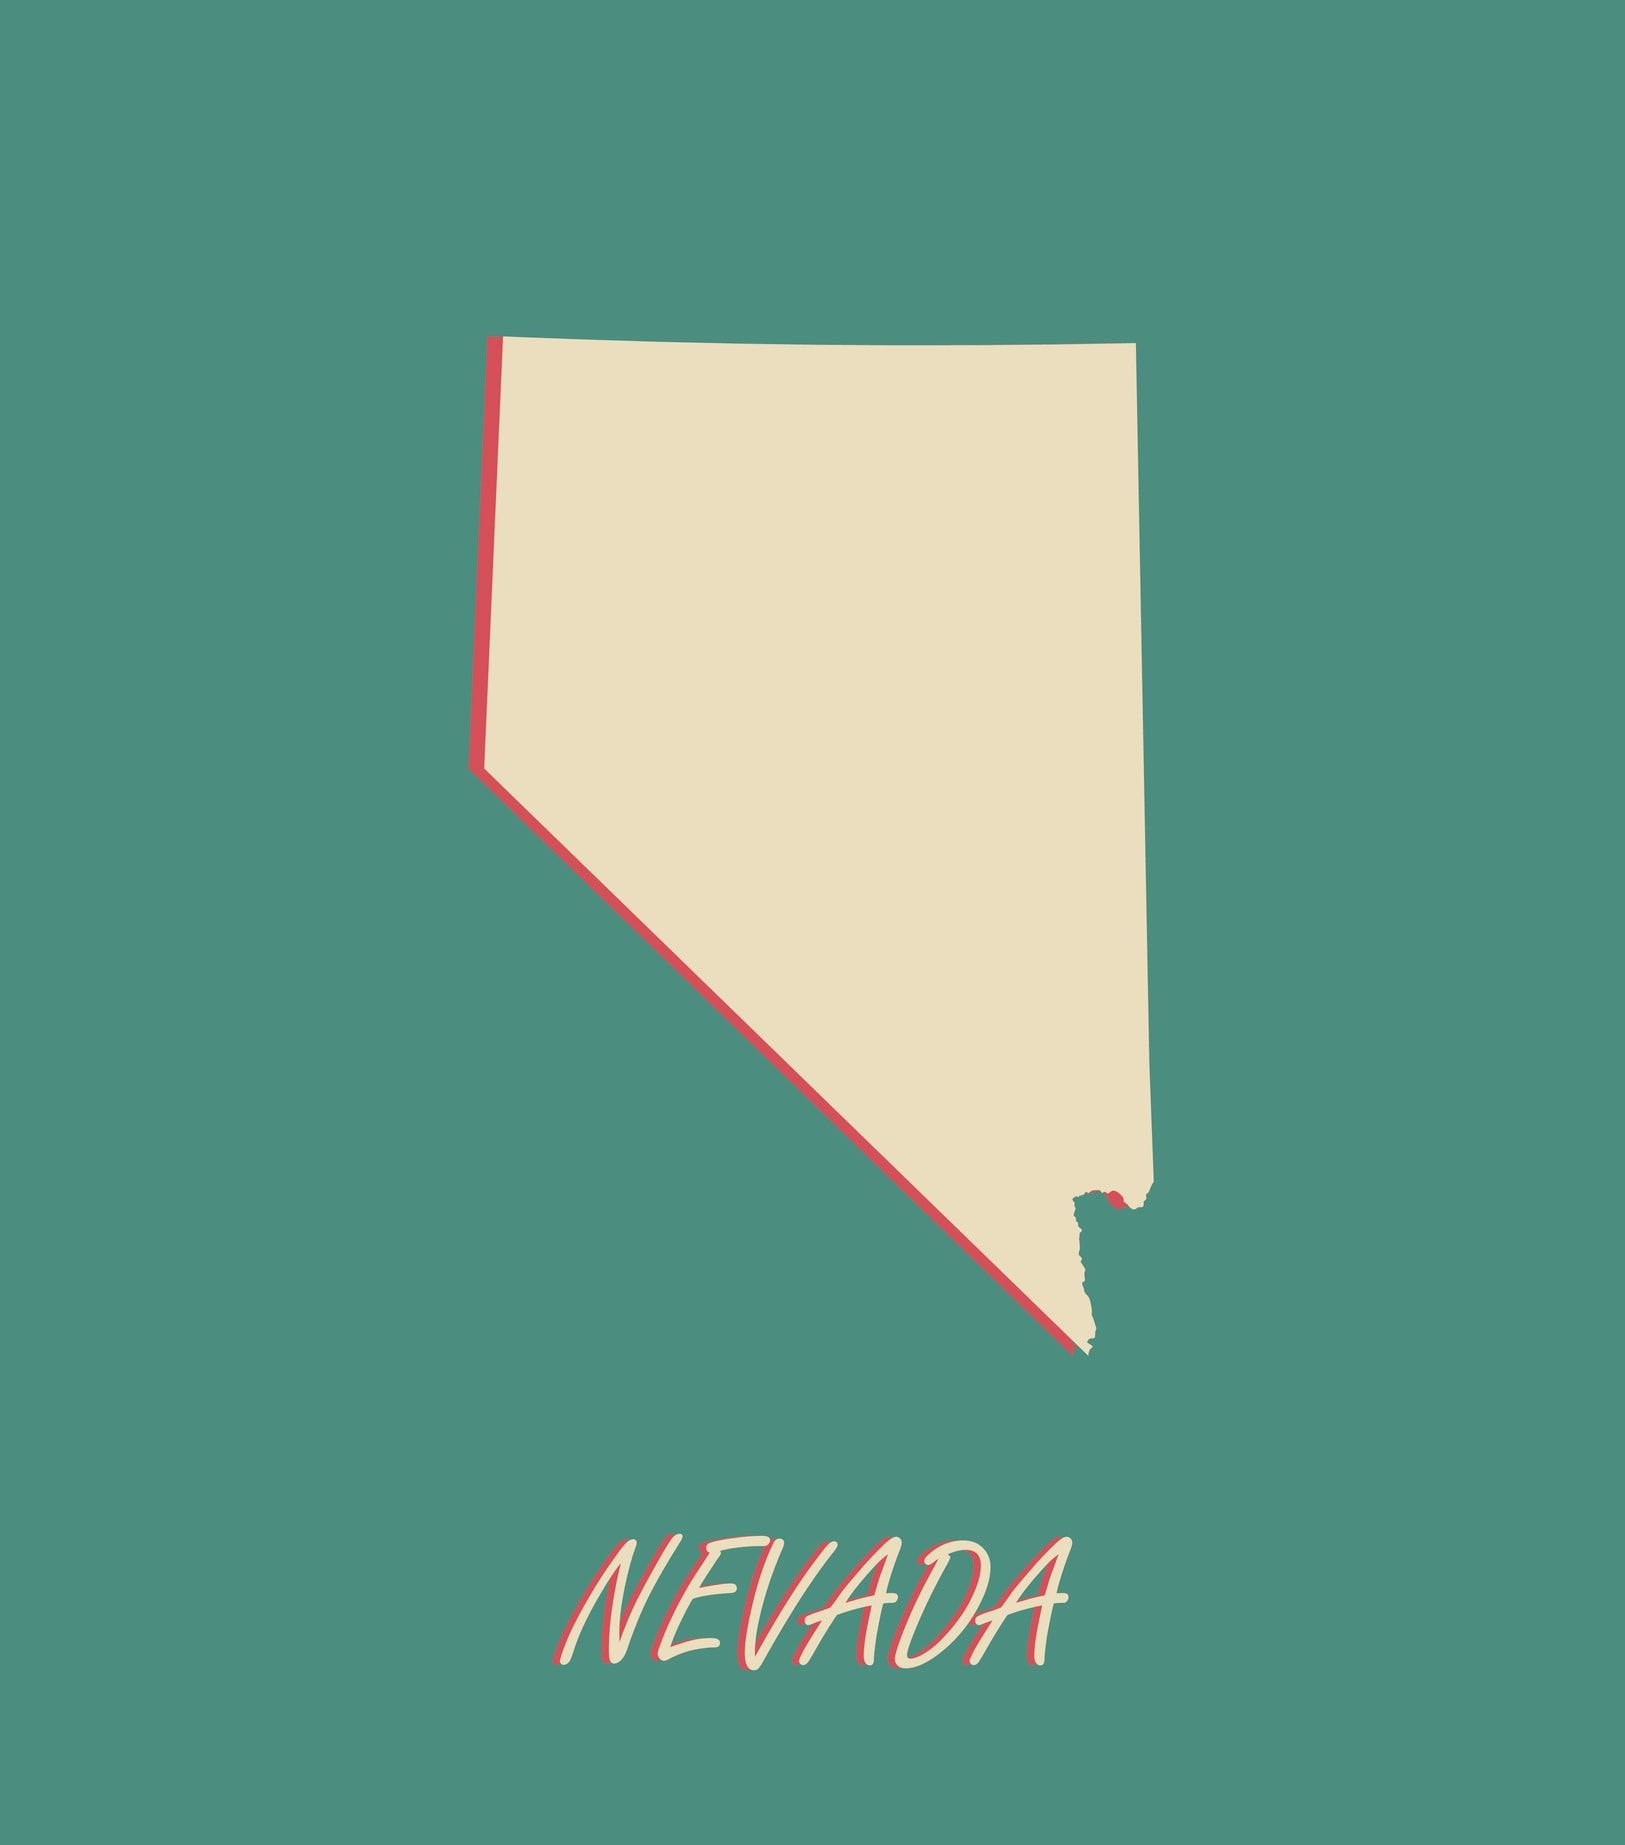 2023 Nevada household employment tax and labor law guide